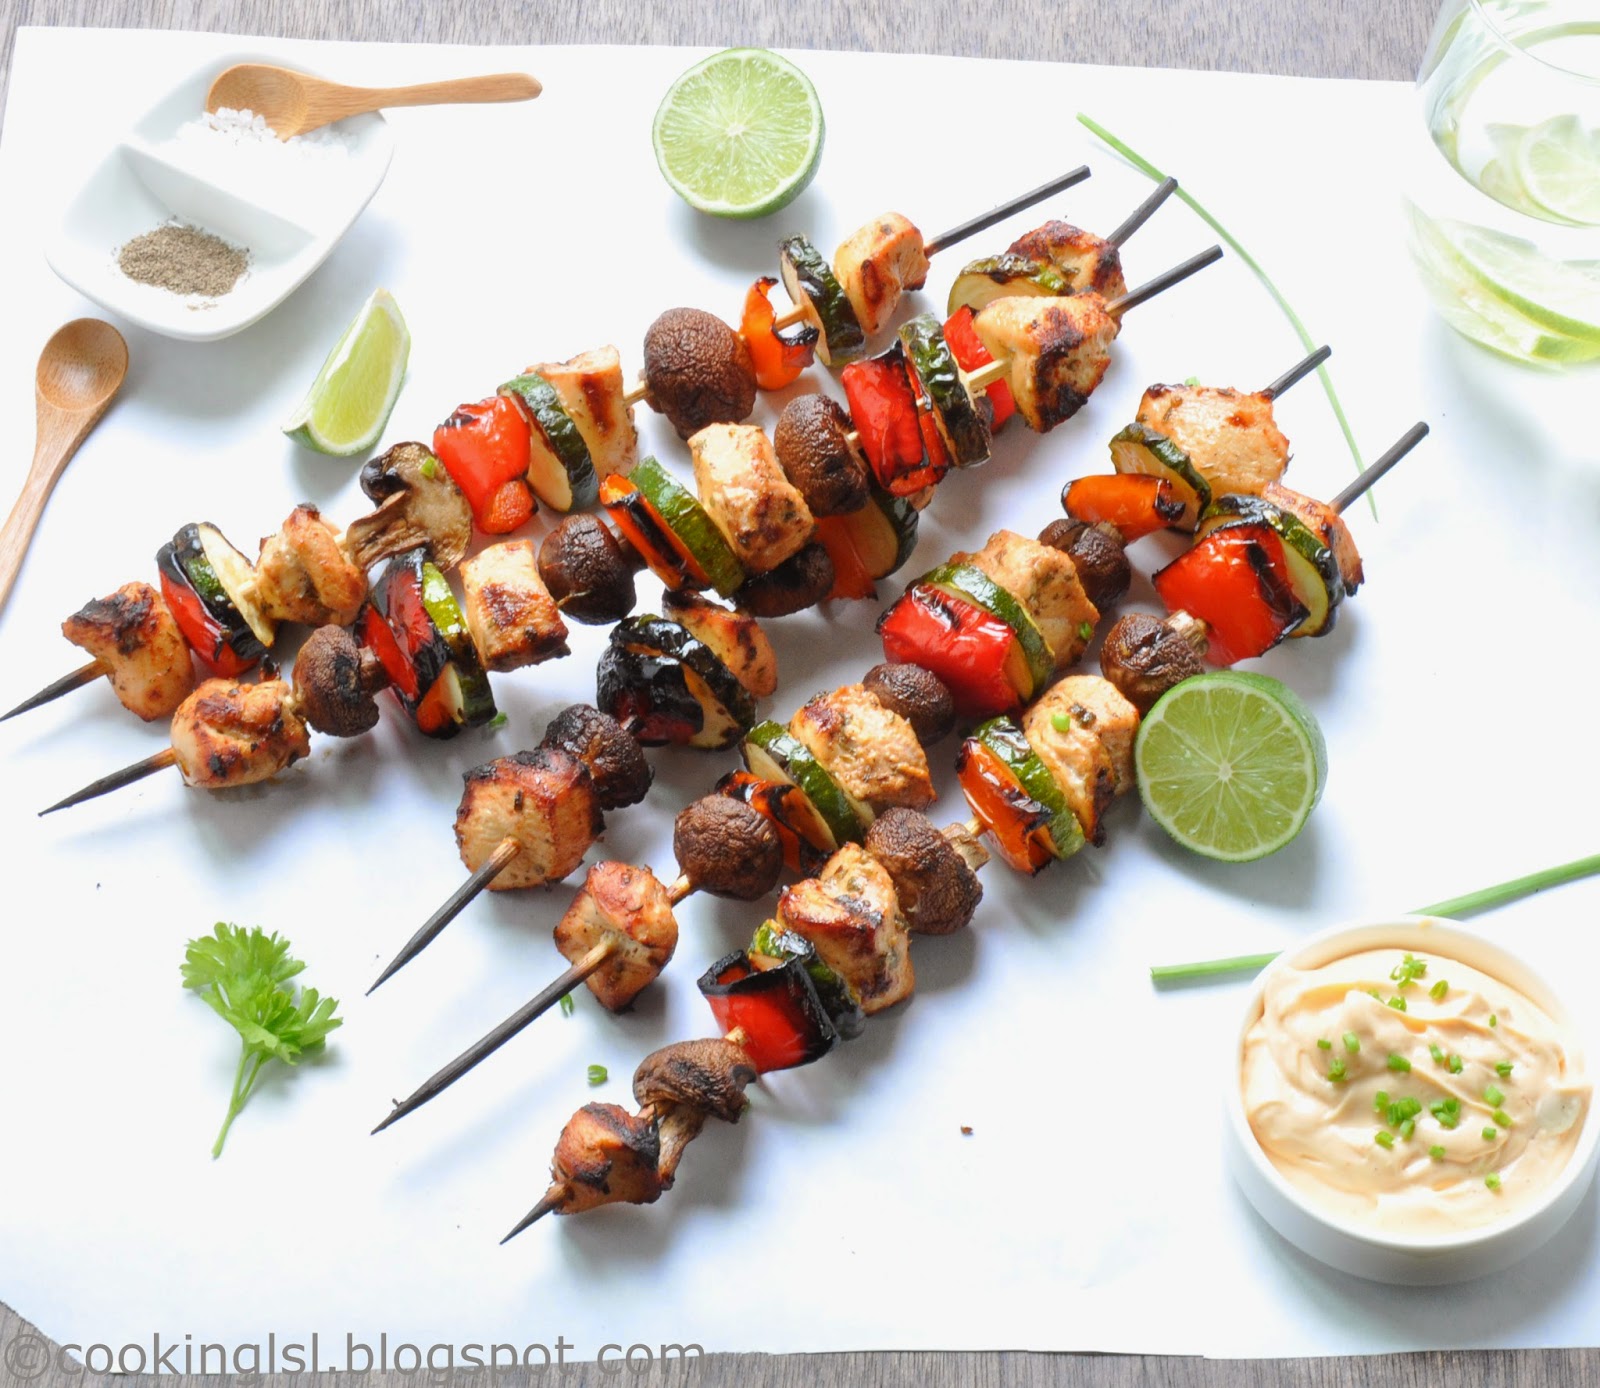 Cooking LSL: Chicken Kabobs With Mushrooms, Zucchini And Peppers